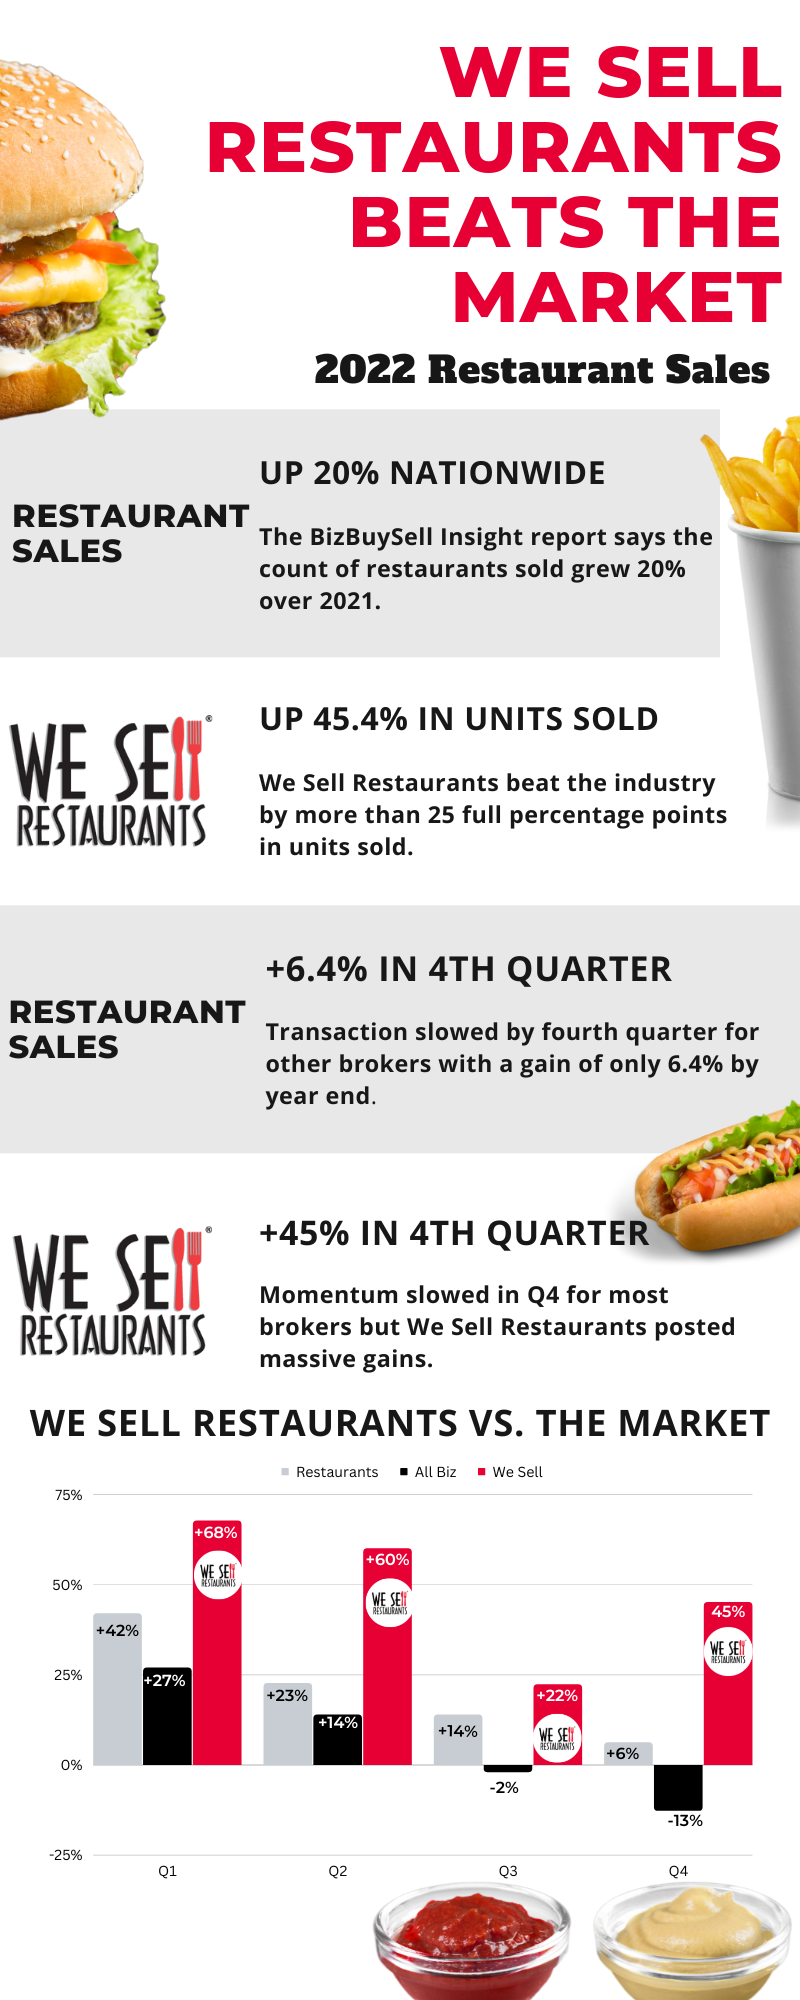 We Sell Restaurants Outpaces the Restaurant for Sale Market by 25 Points in 2022